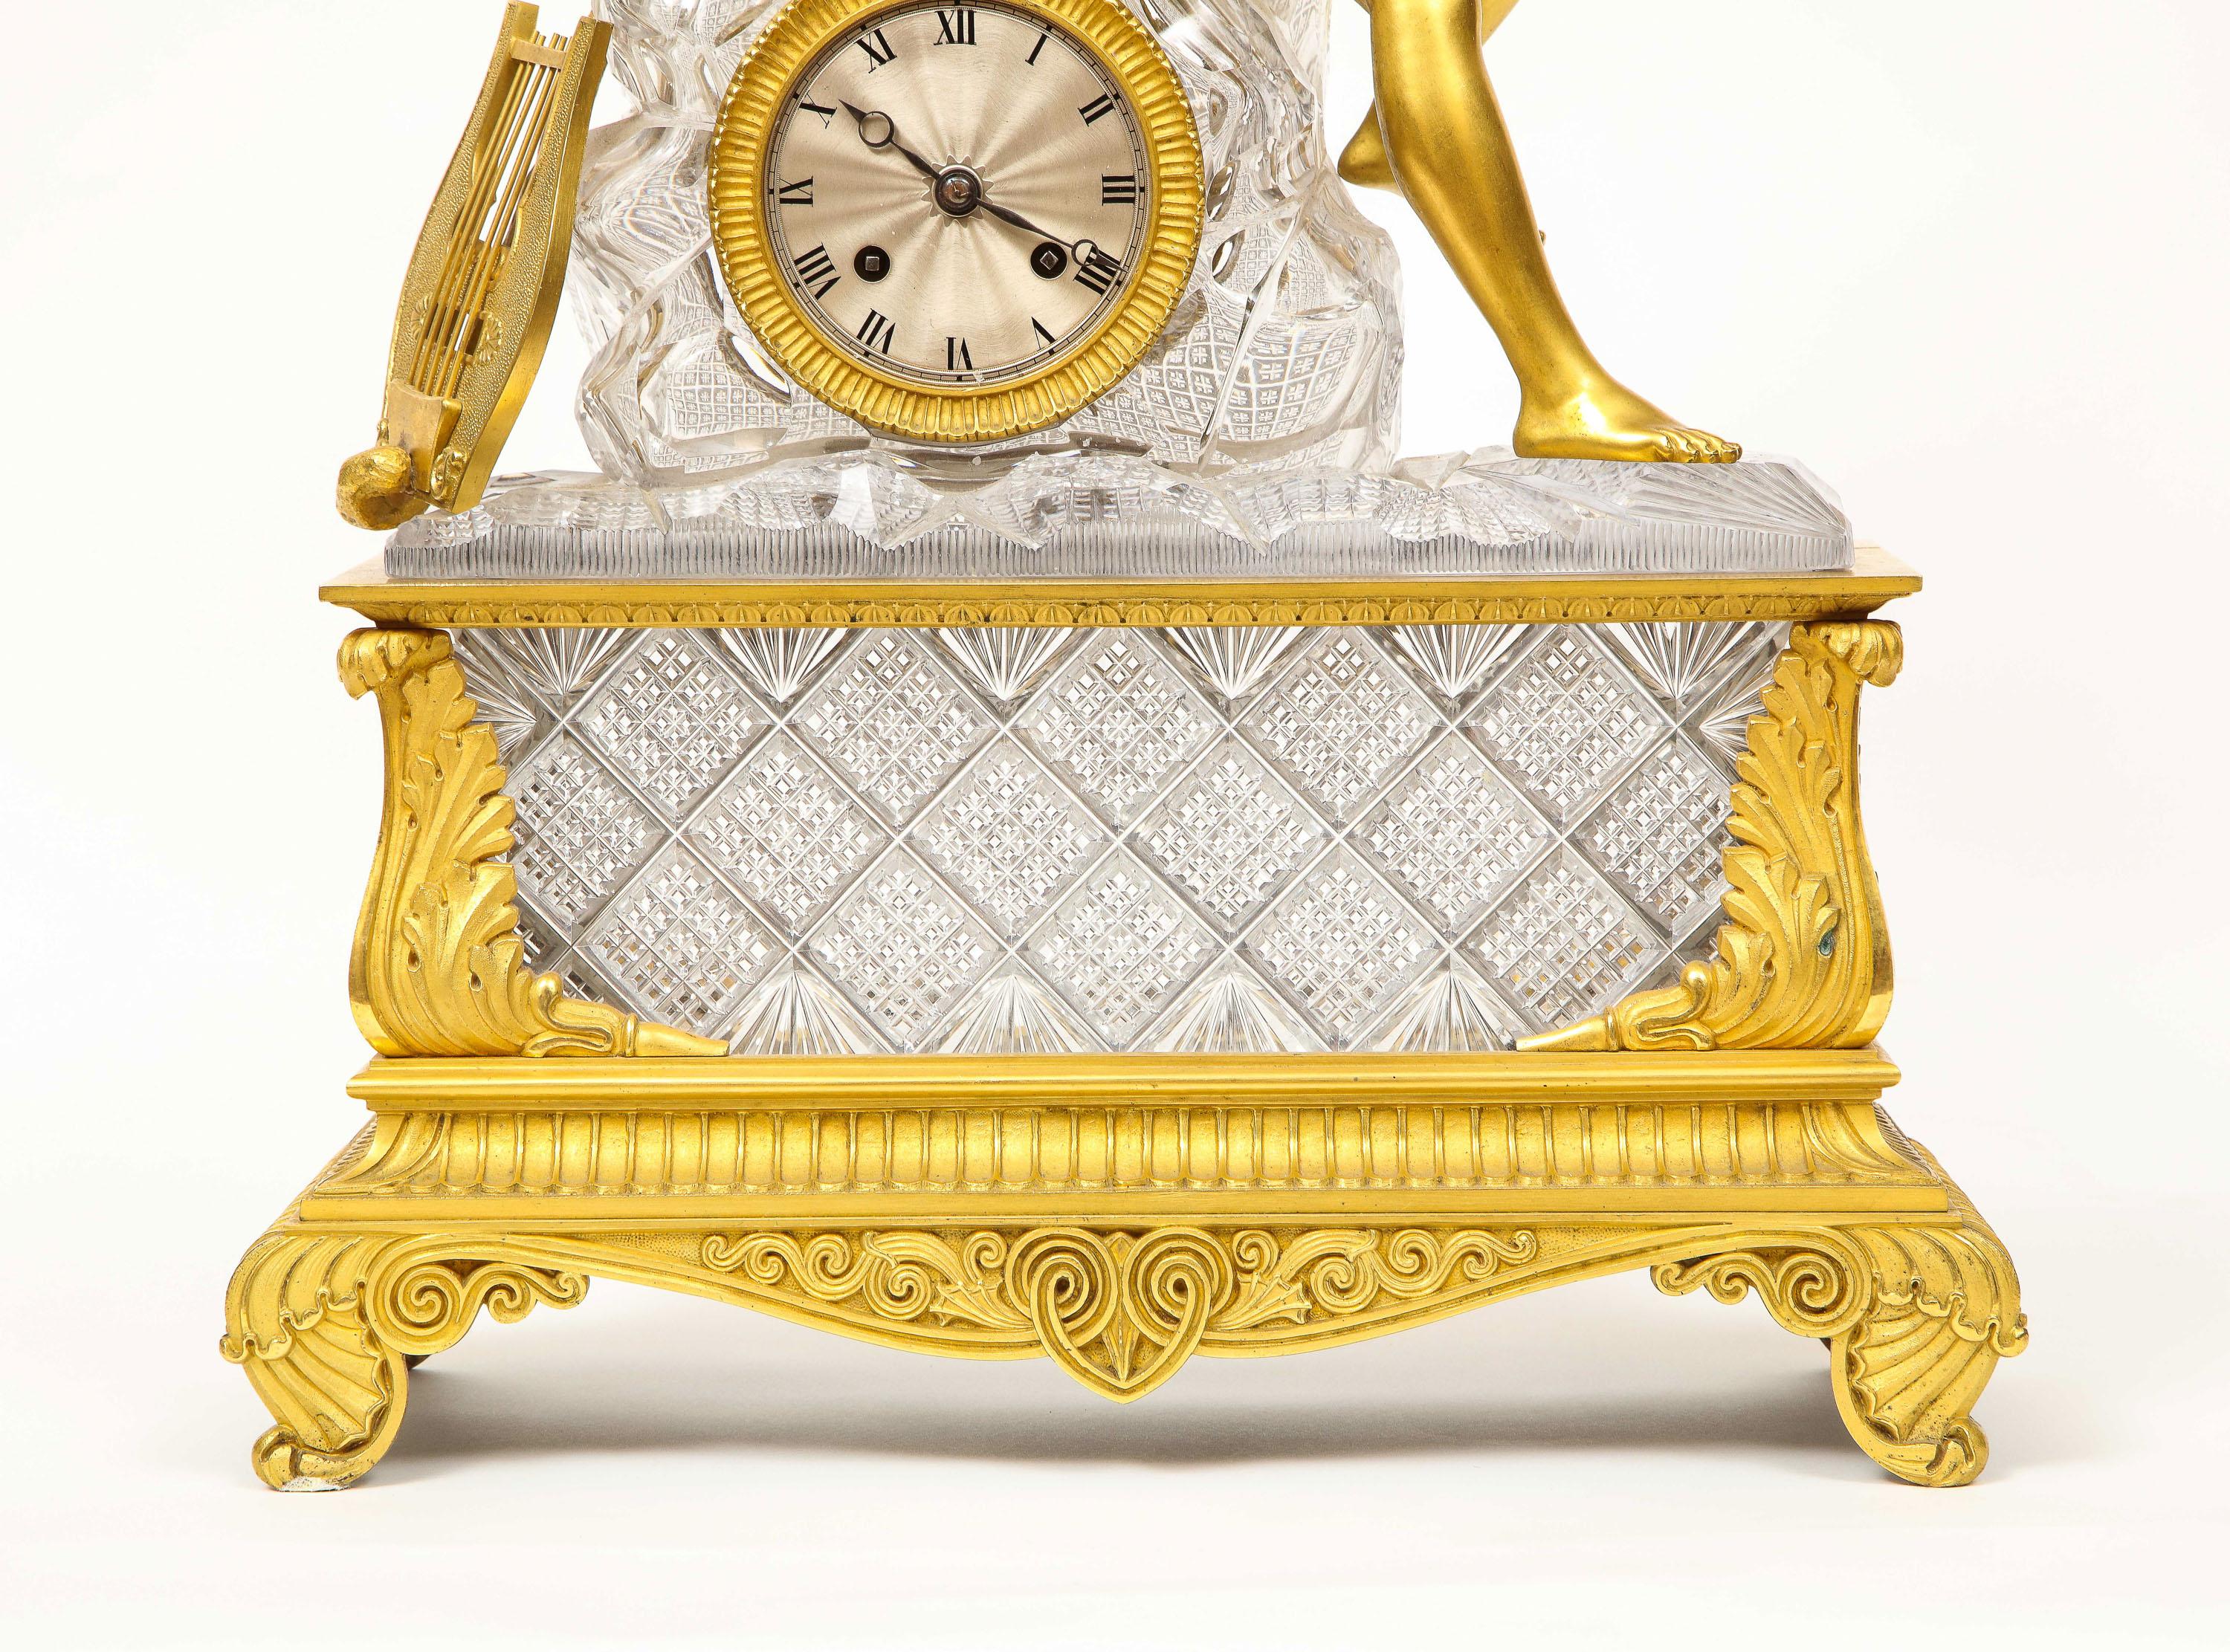 Exquisite French Empire Ormolu and Cut-Crystal Clock, c. 1815 In Good Condition For Sale In New York, NY